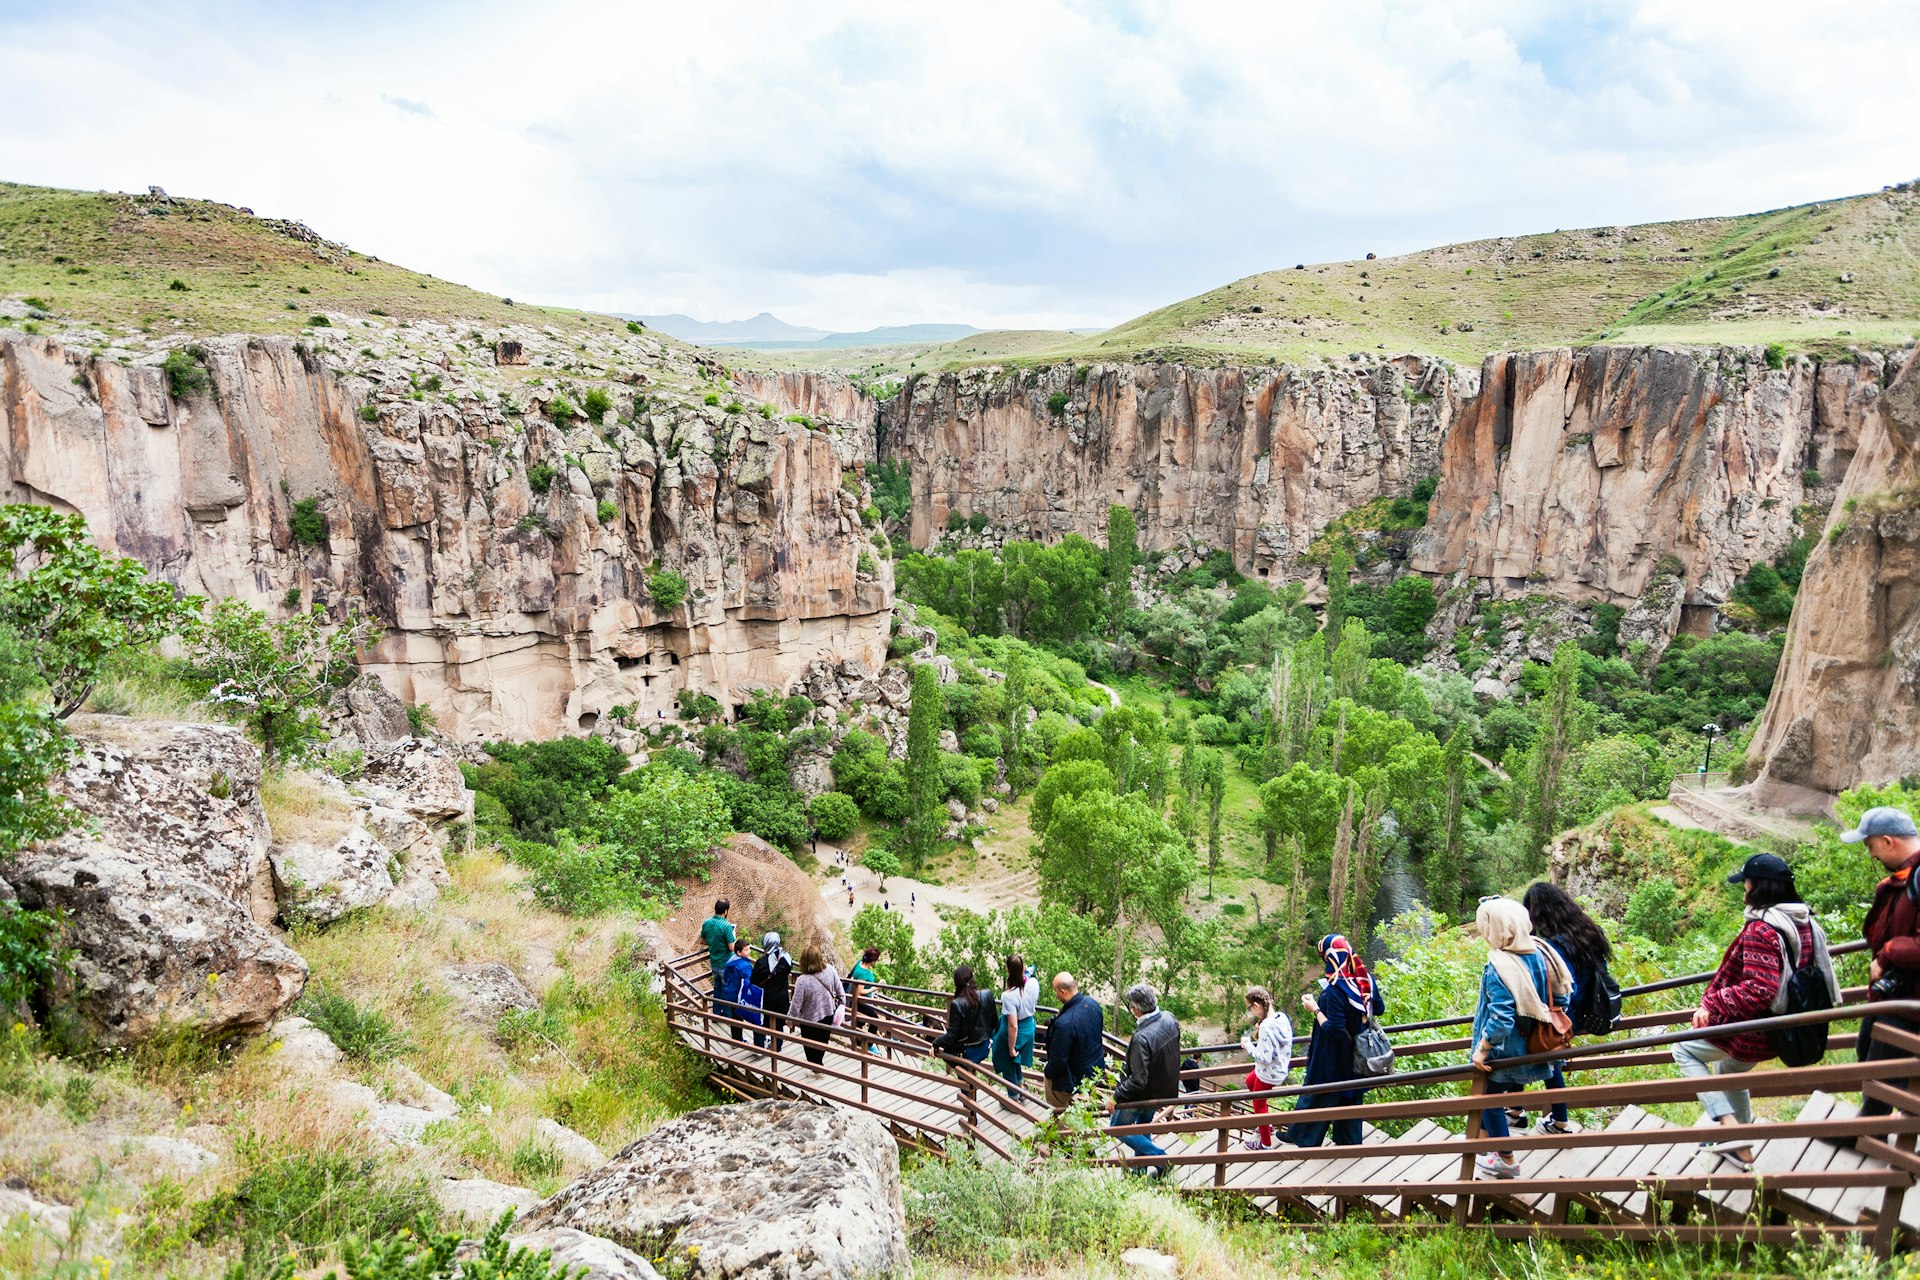 Tourists follow a boardwalk down into a valley